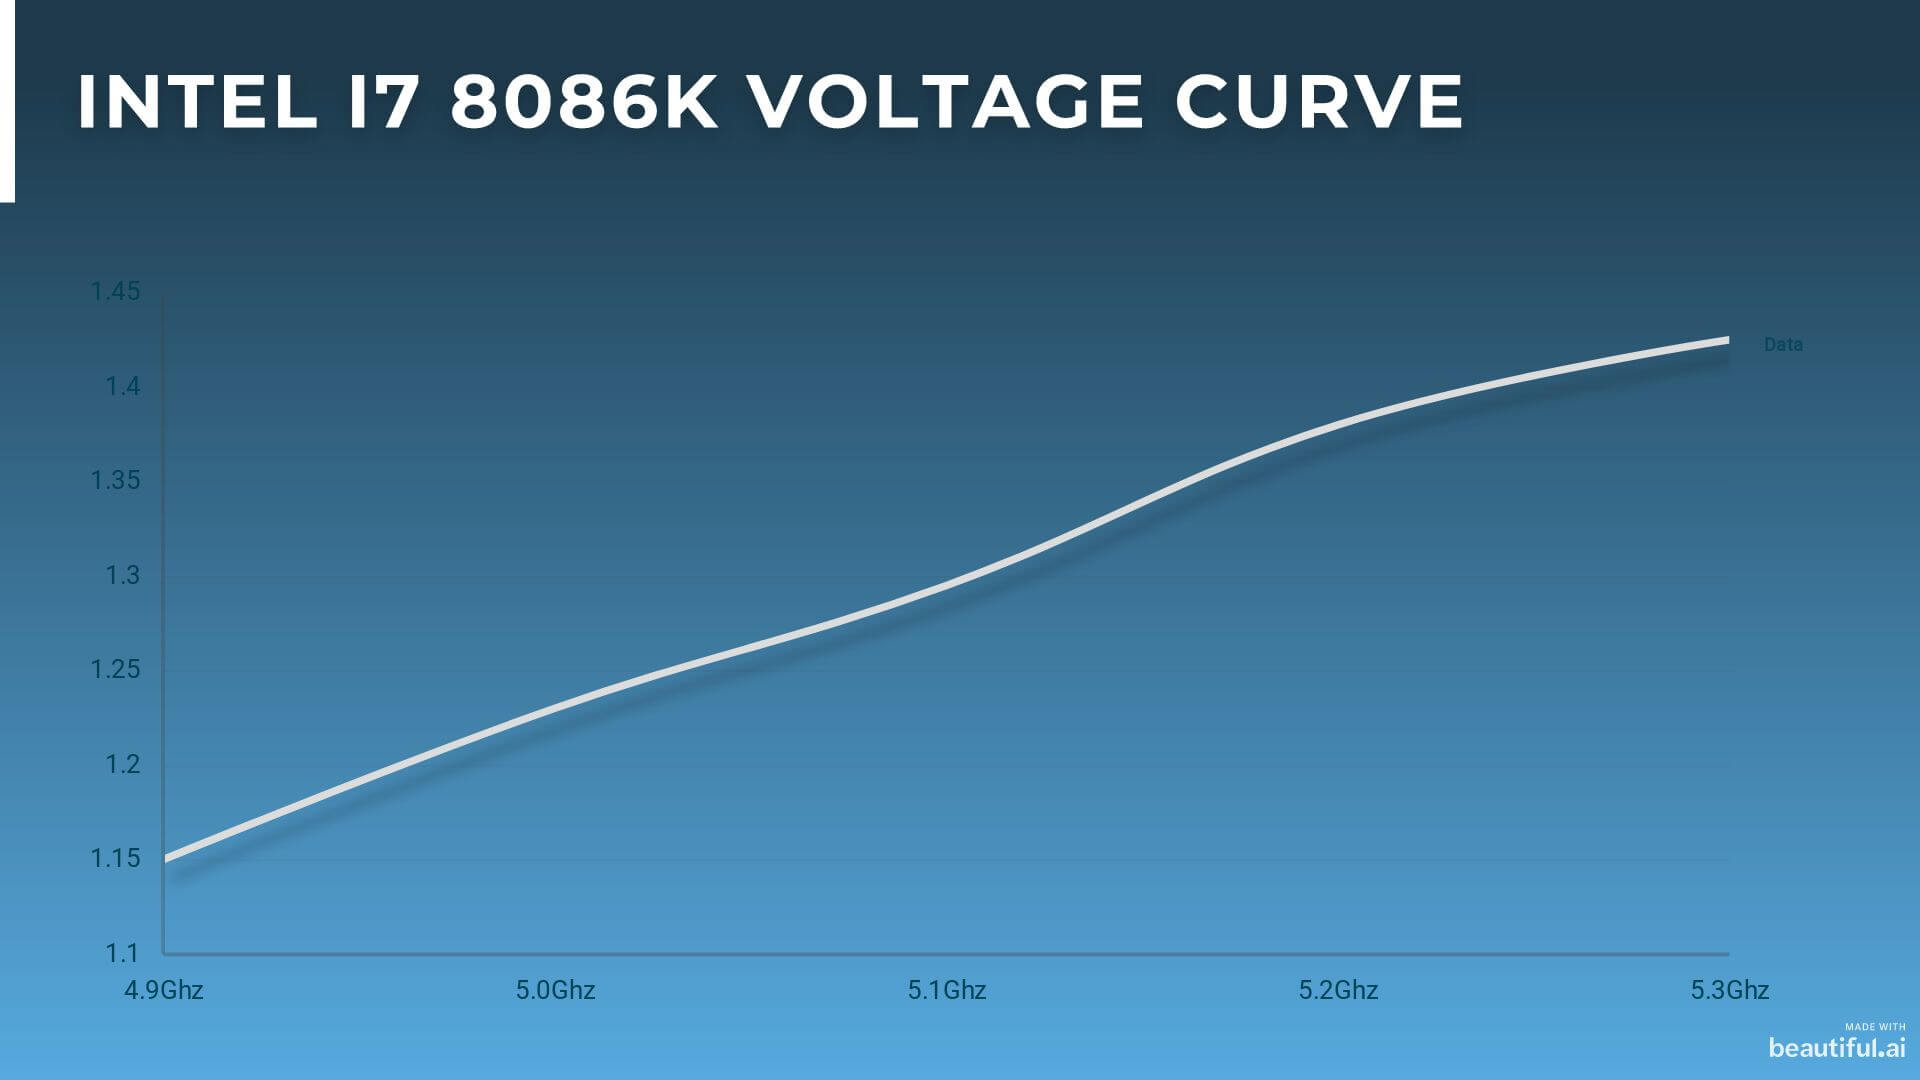 Voltage Curve from 4.9Ghz to 5.3Ghz